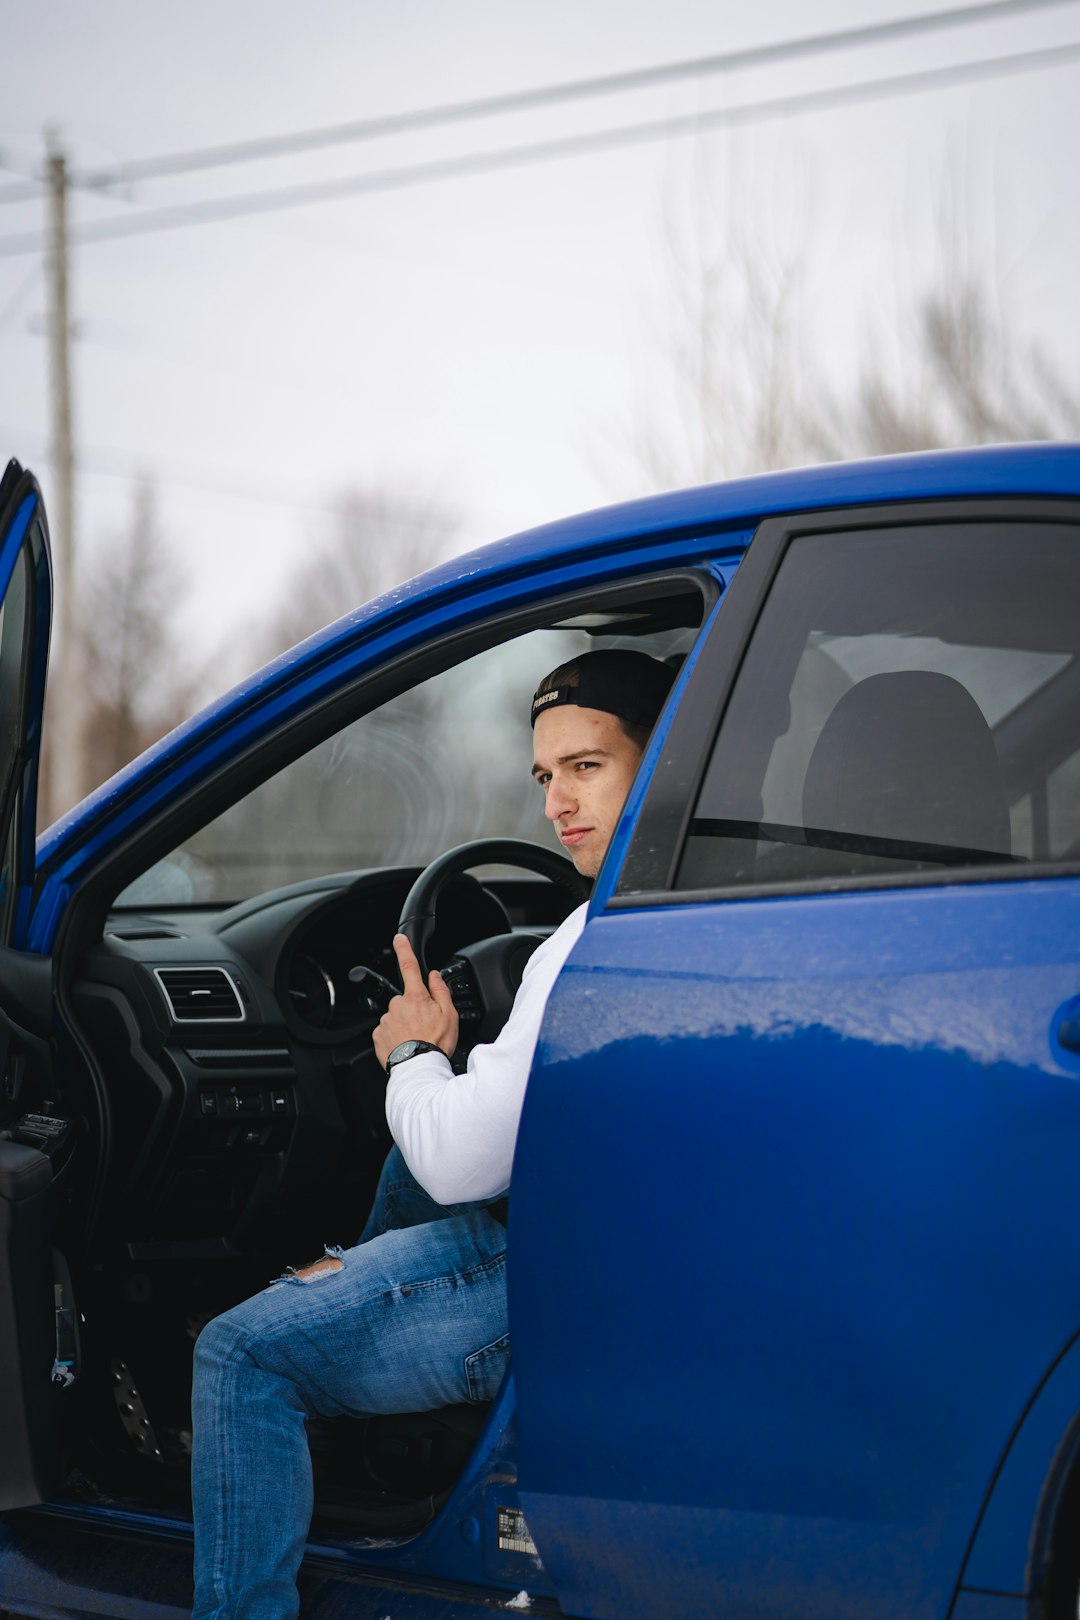 man in black jacket and blue denim jeans leaning on blue car